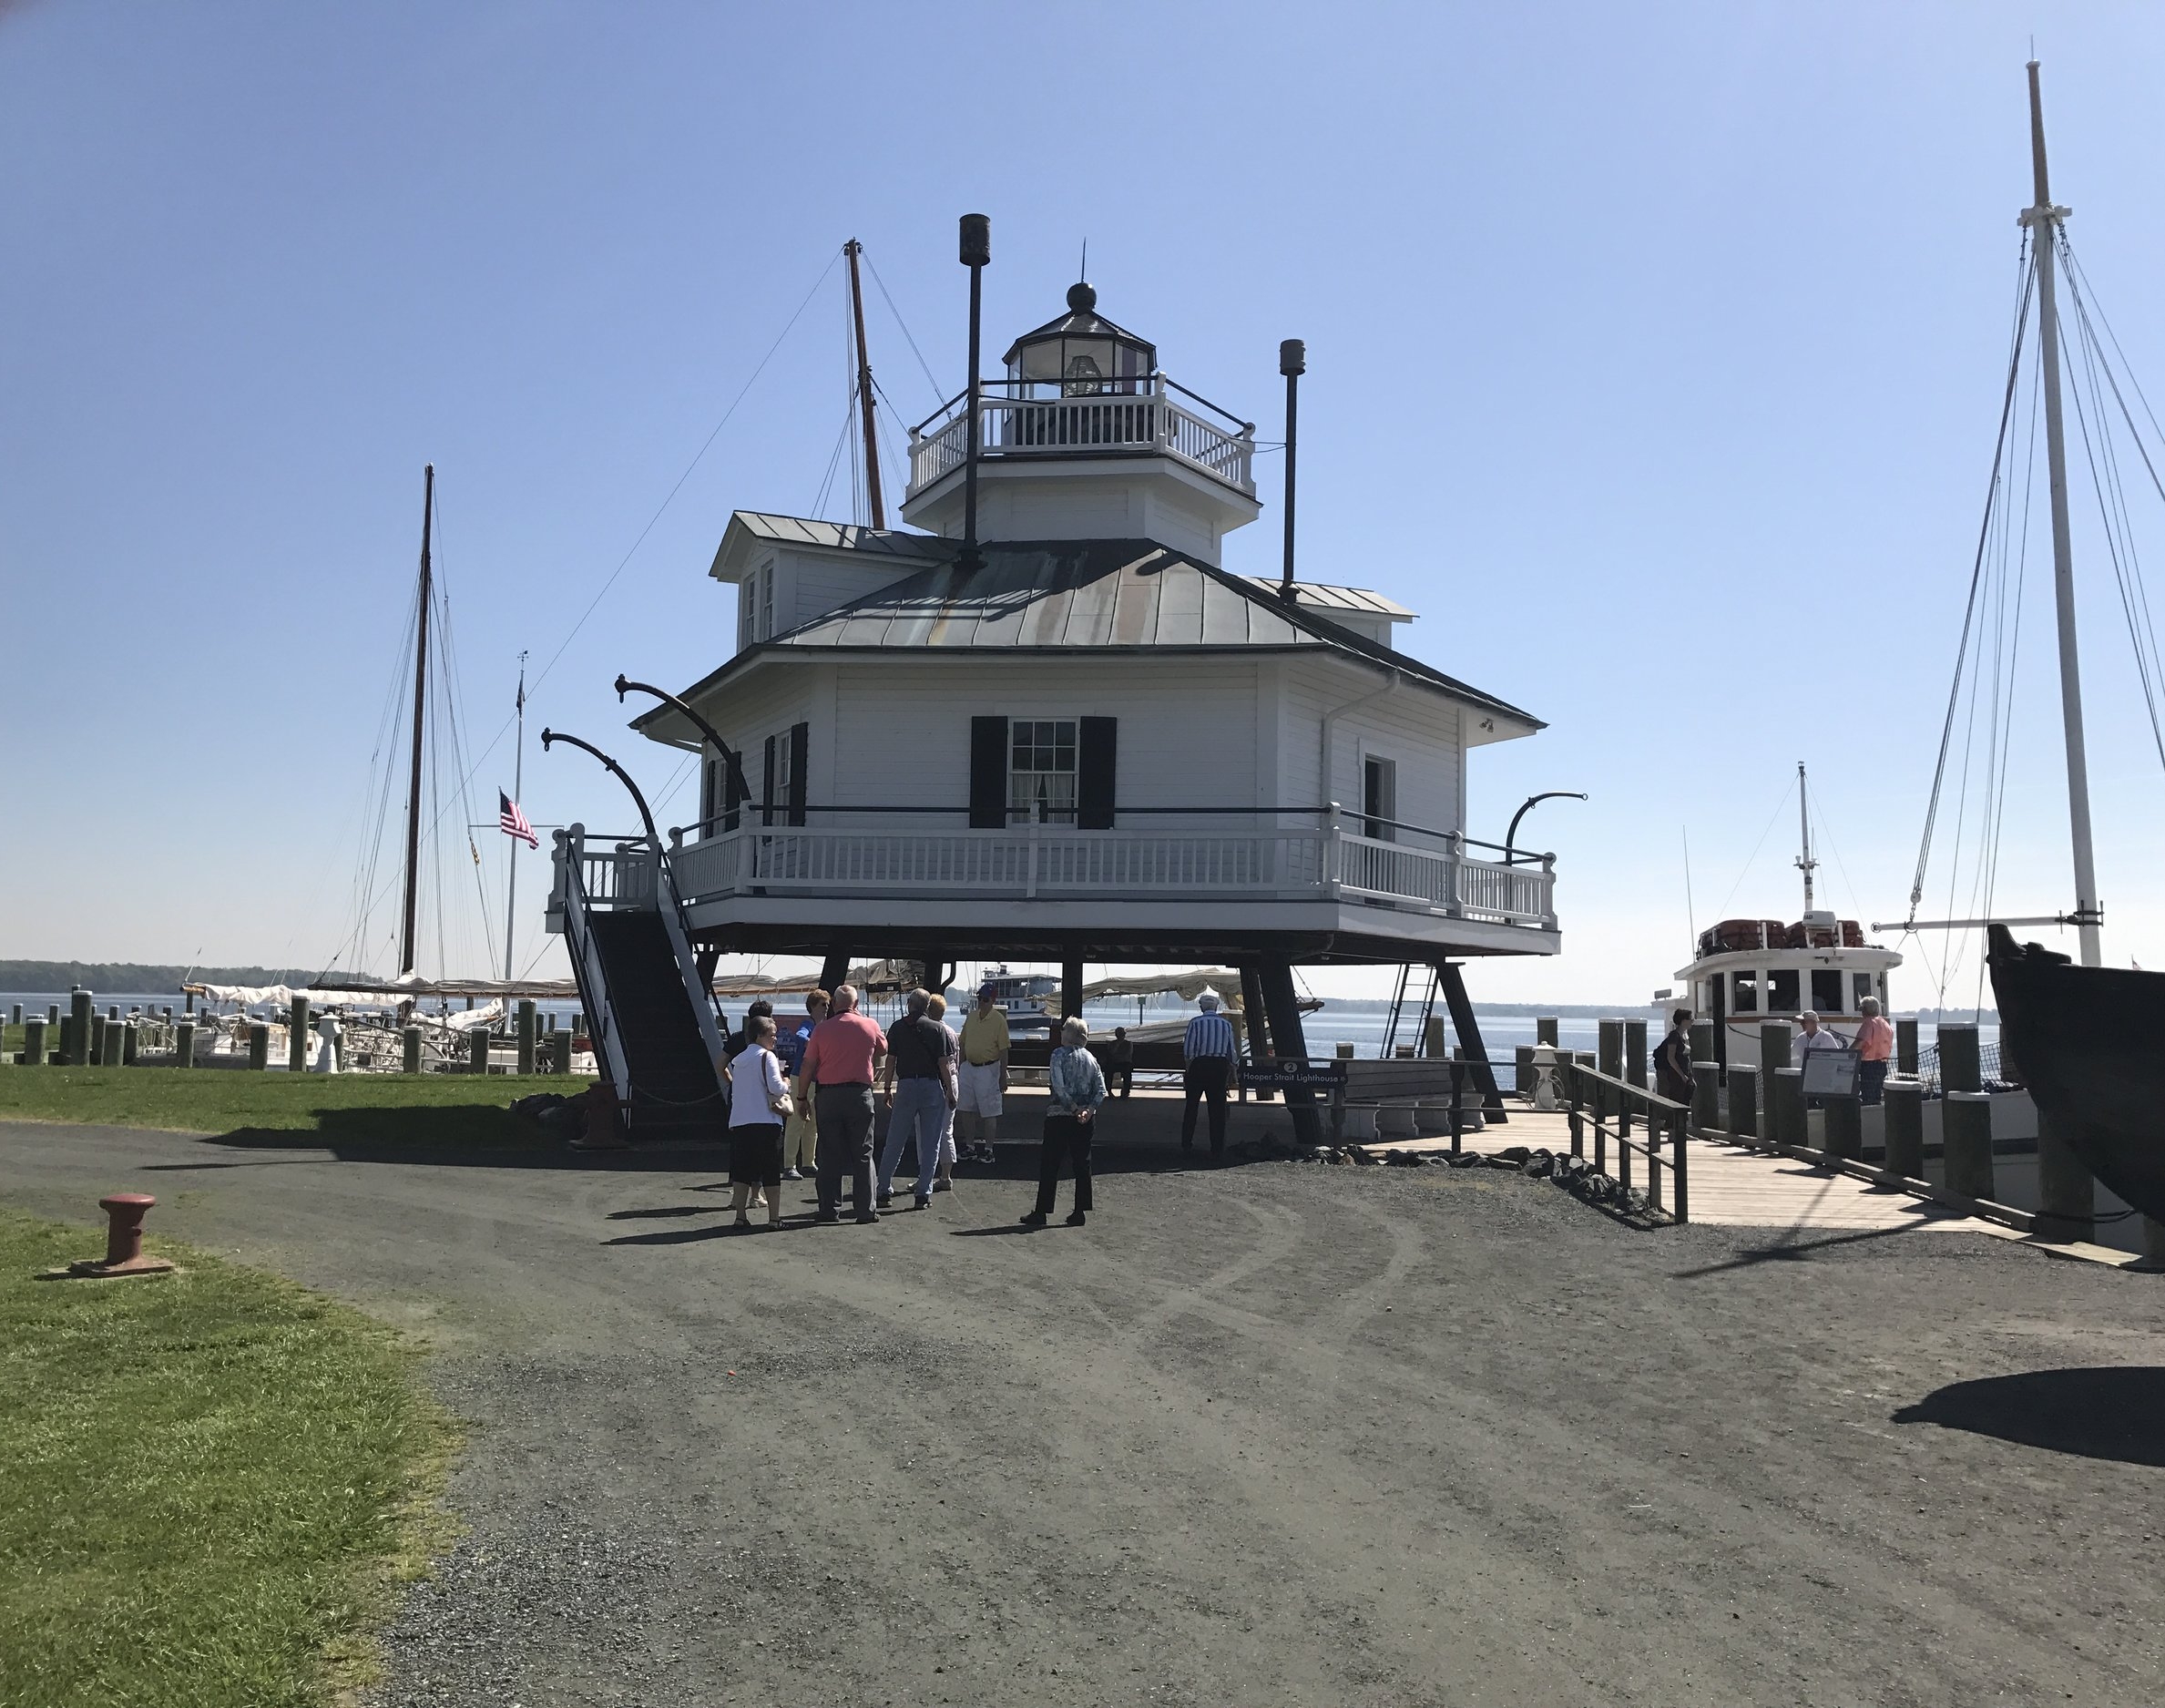 Restored Lighthouse at the Chesapeake Bay Maritime Museum